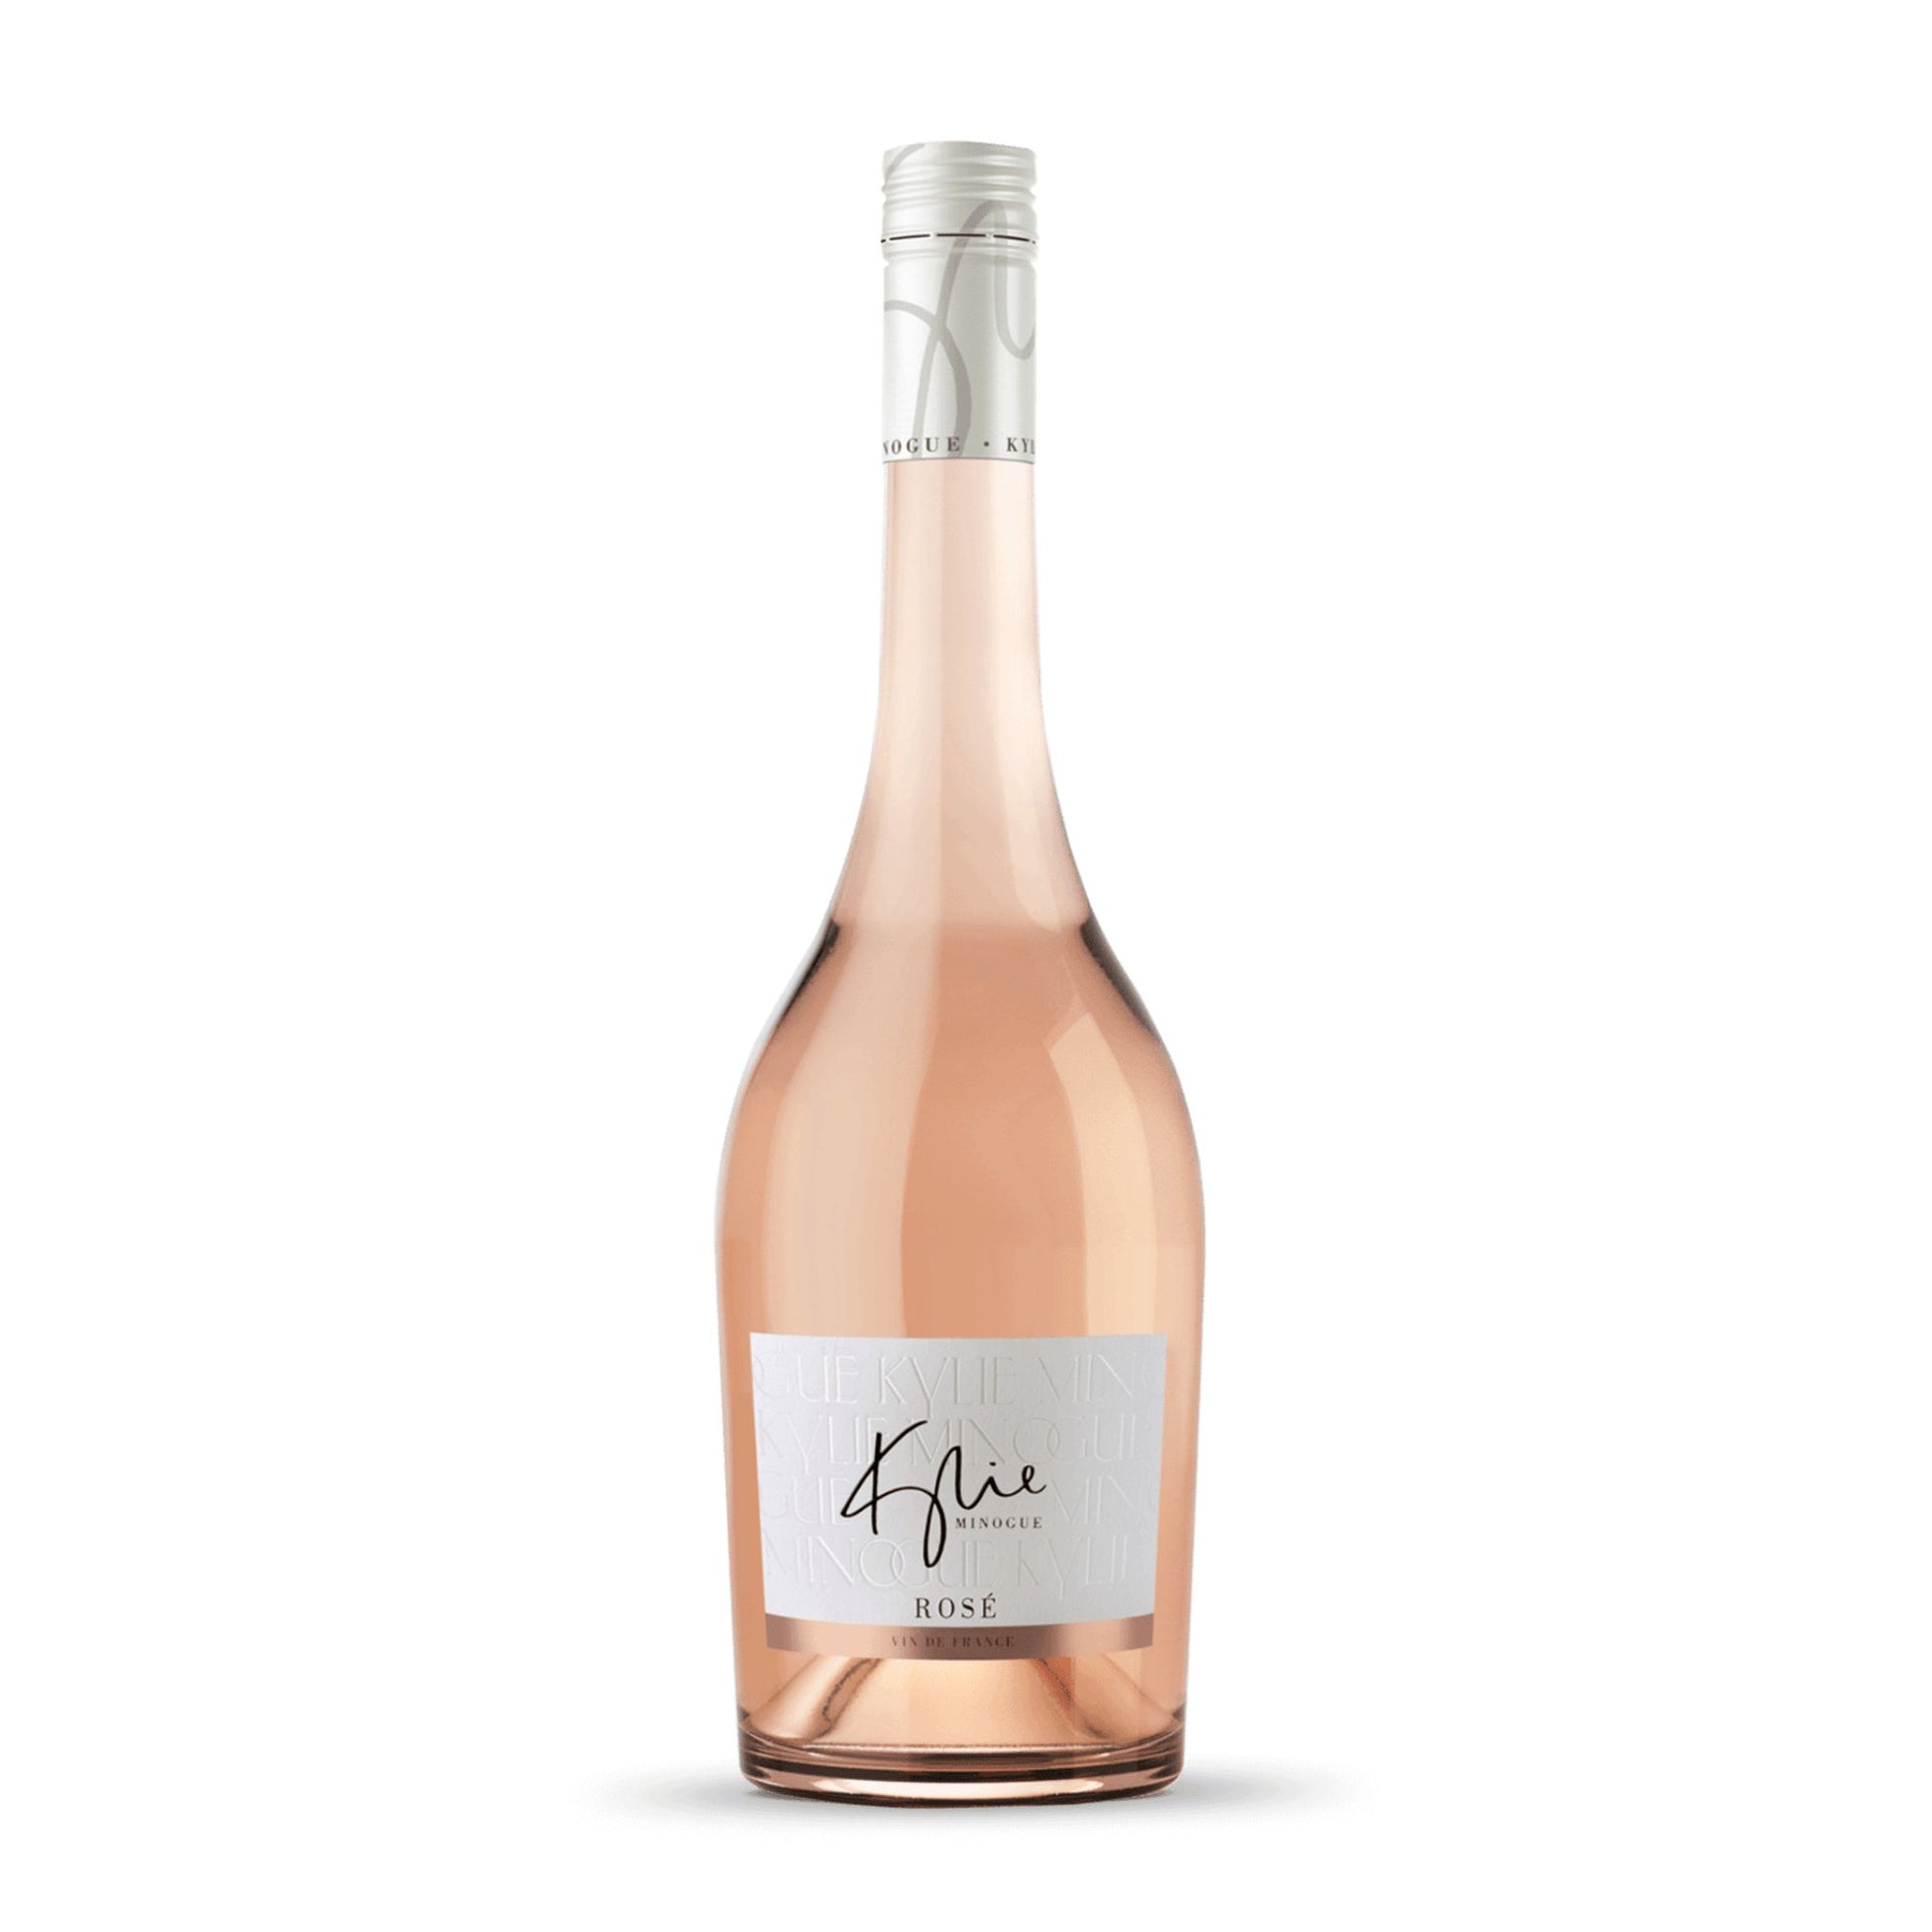 Kylie Minogue Signature Rose French Rose 750mL - Booze House